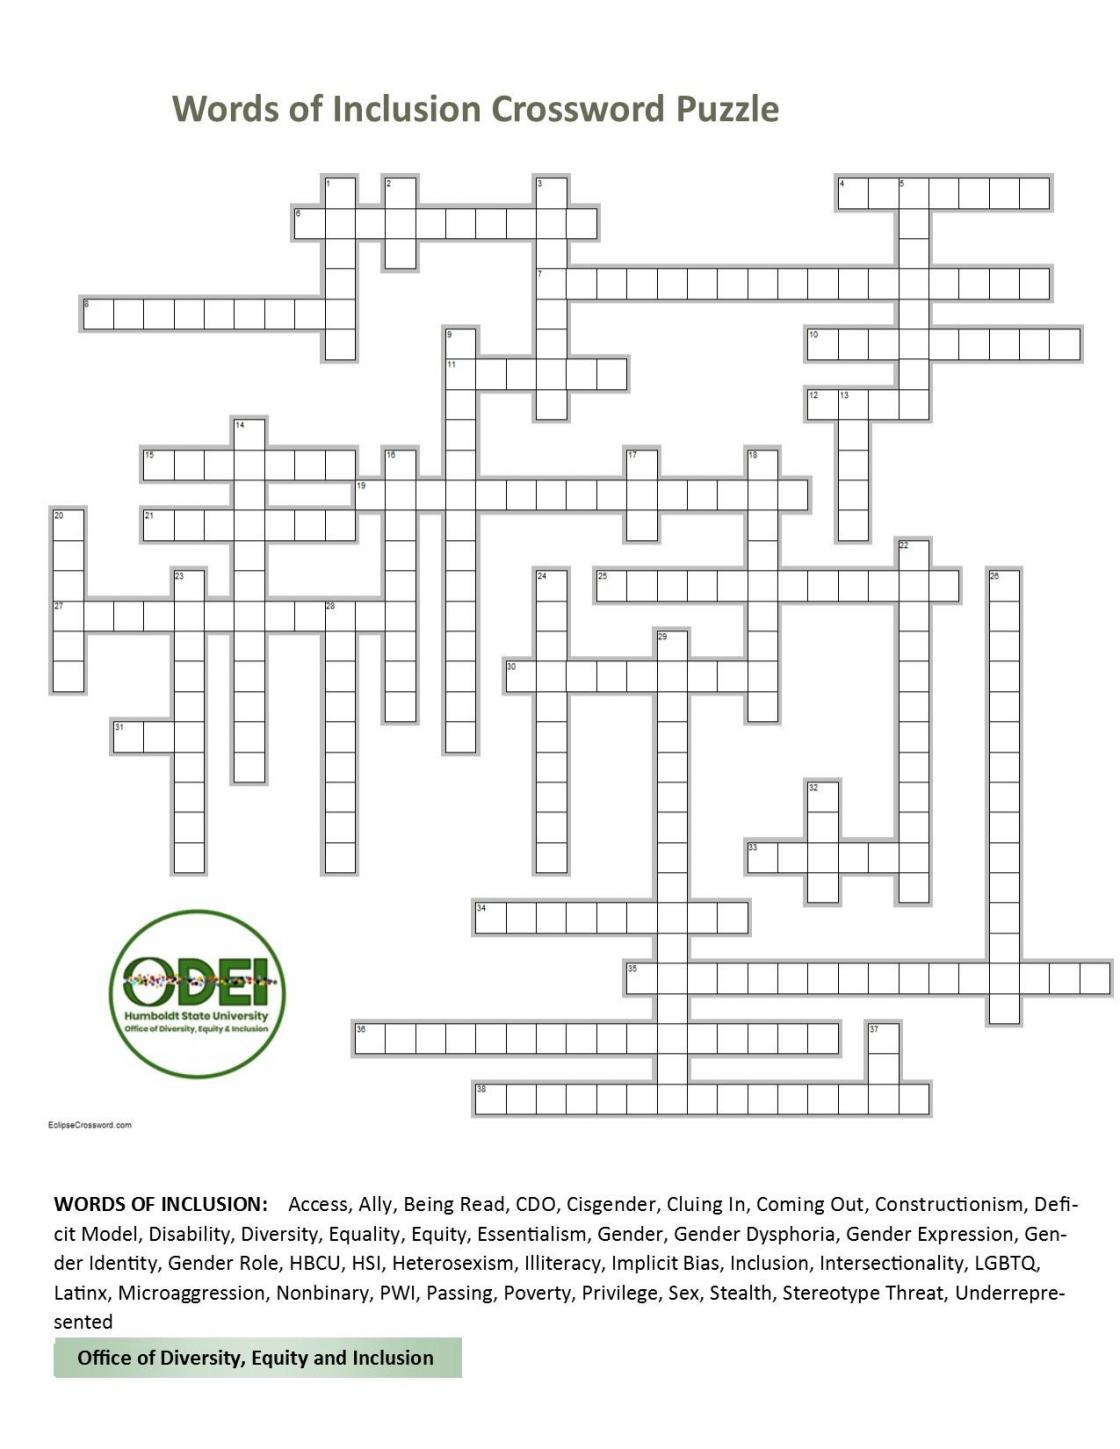 Words of Inclusion Crossword Puzzle Spring 2019 Office of Diversity